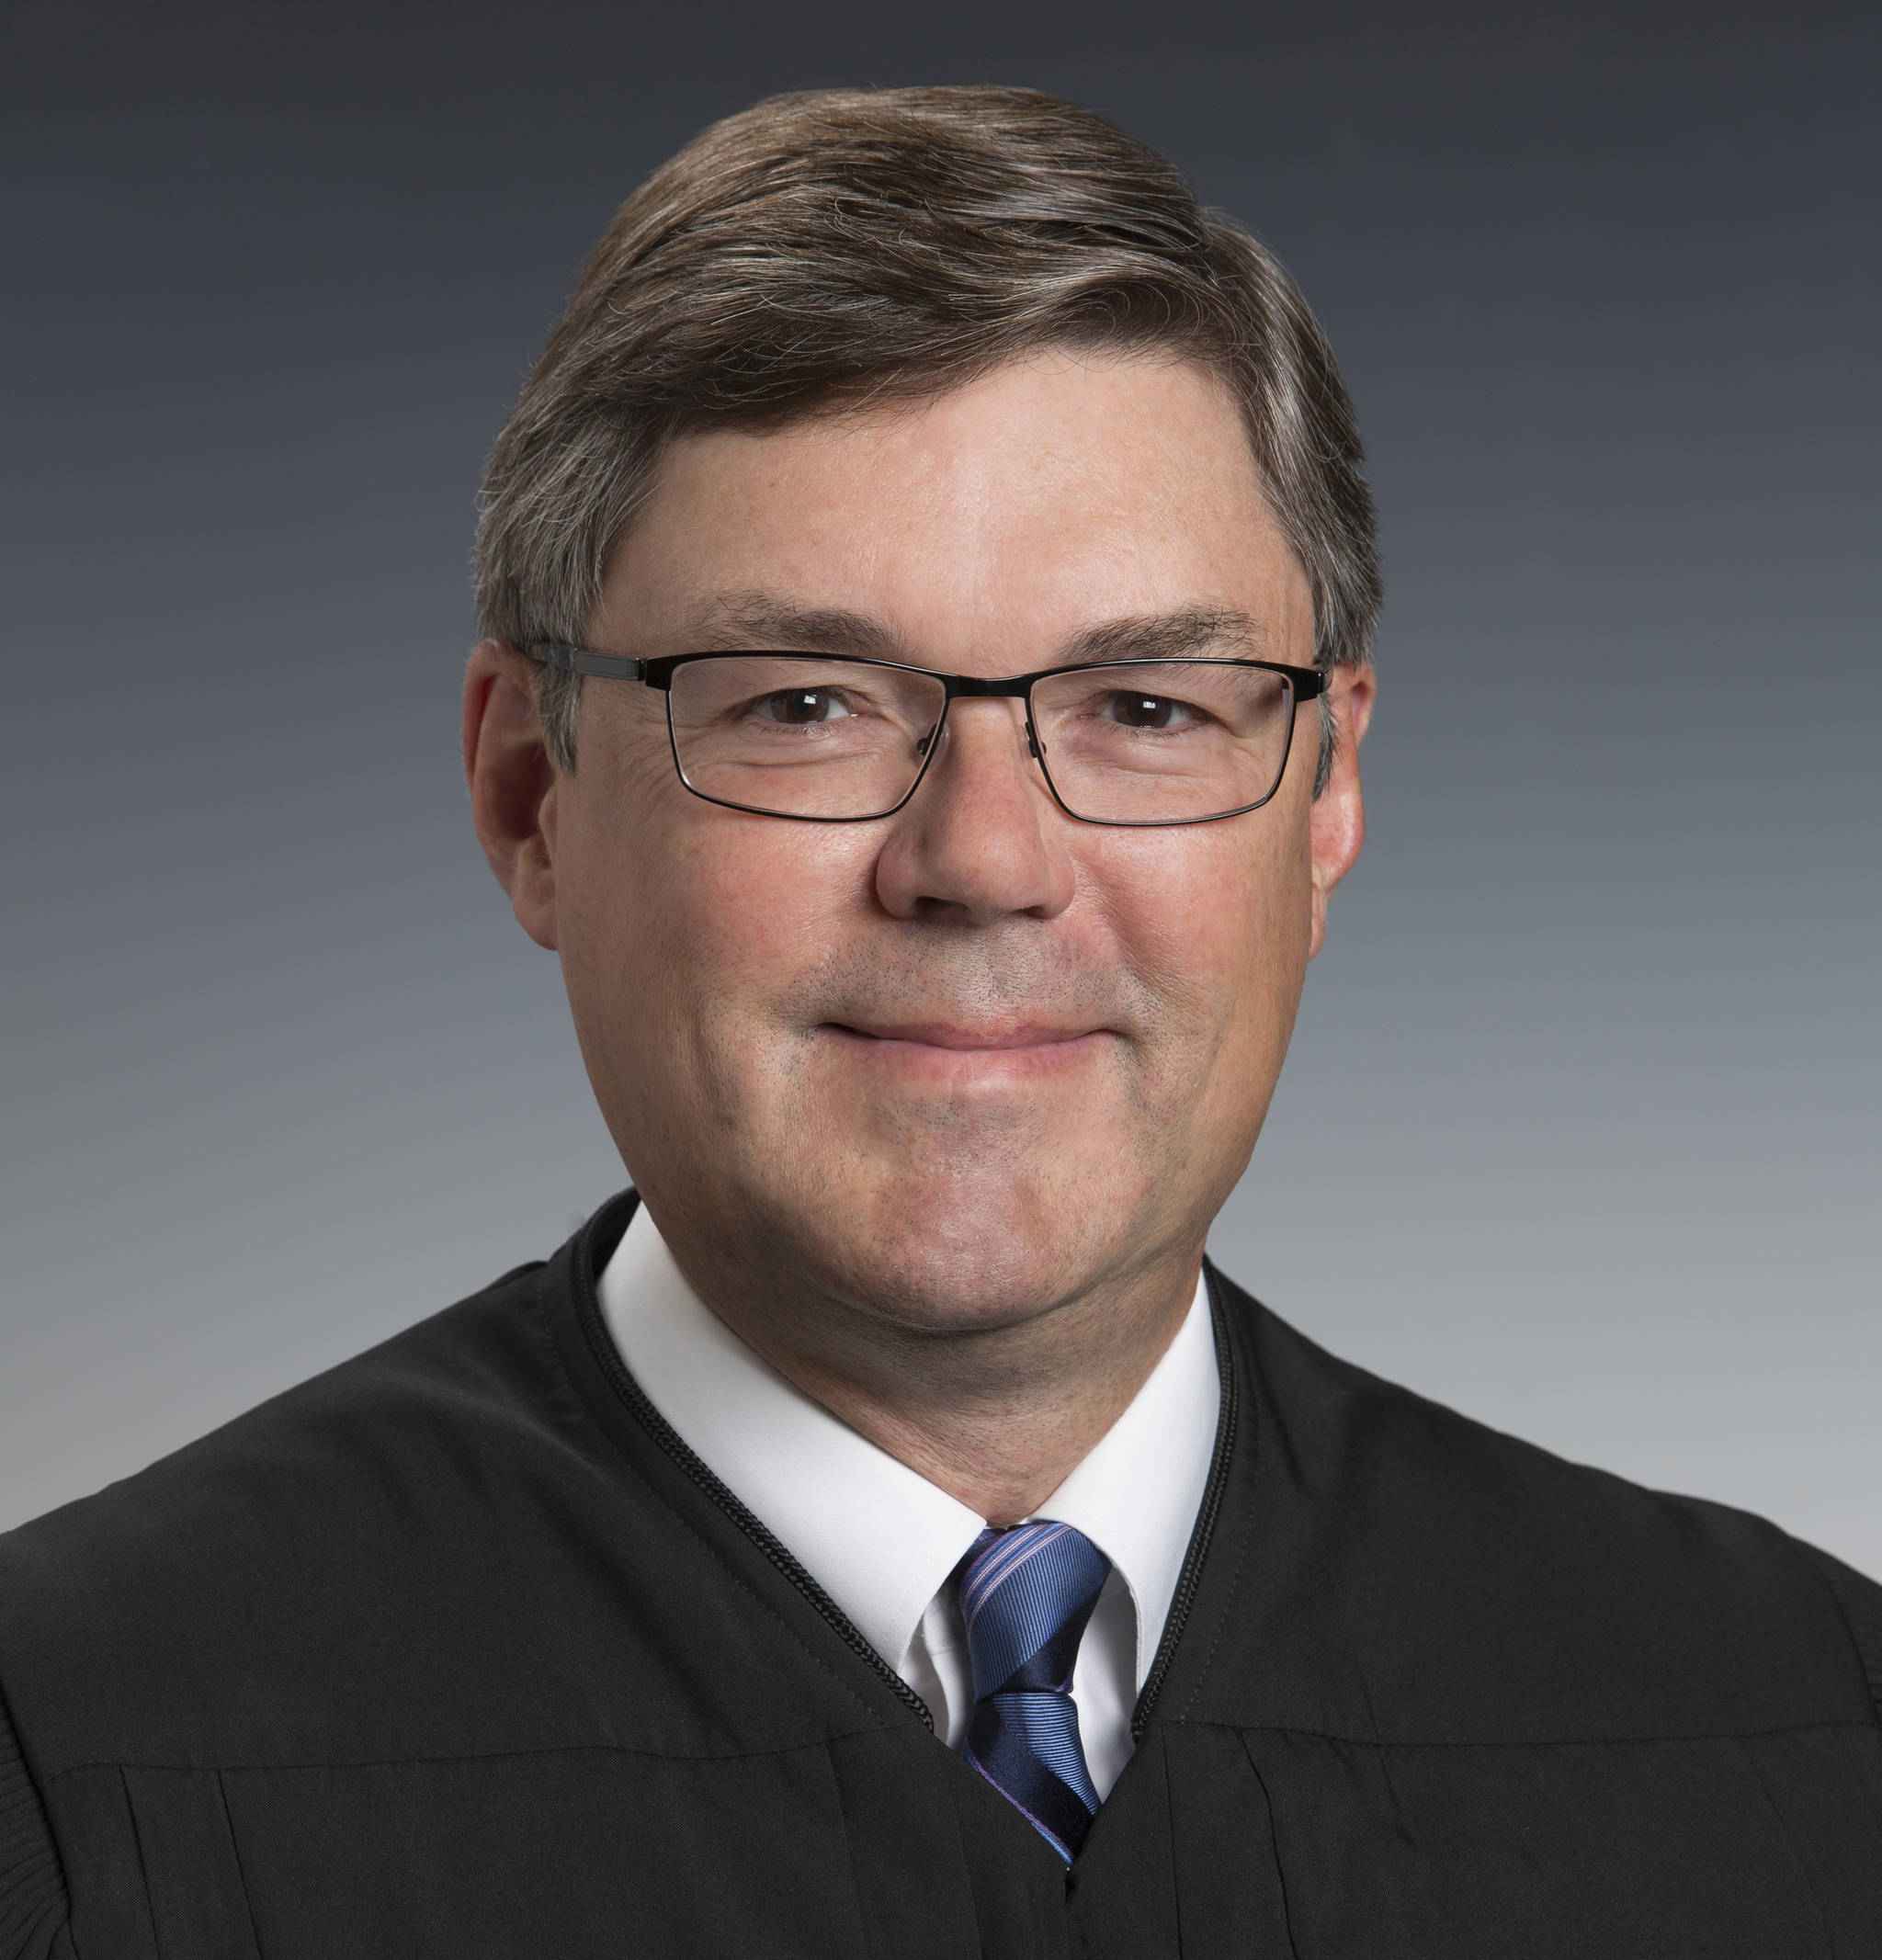 Alaska Supreme Court justice Joel Bolger is seen in a 2015 photo from the Alaska Court System. (Contributed photo)